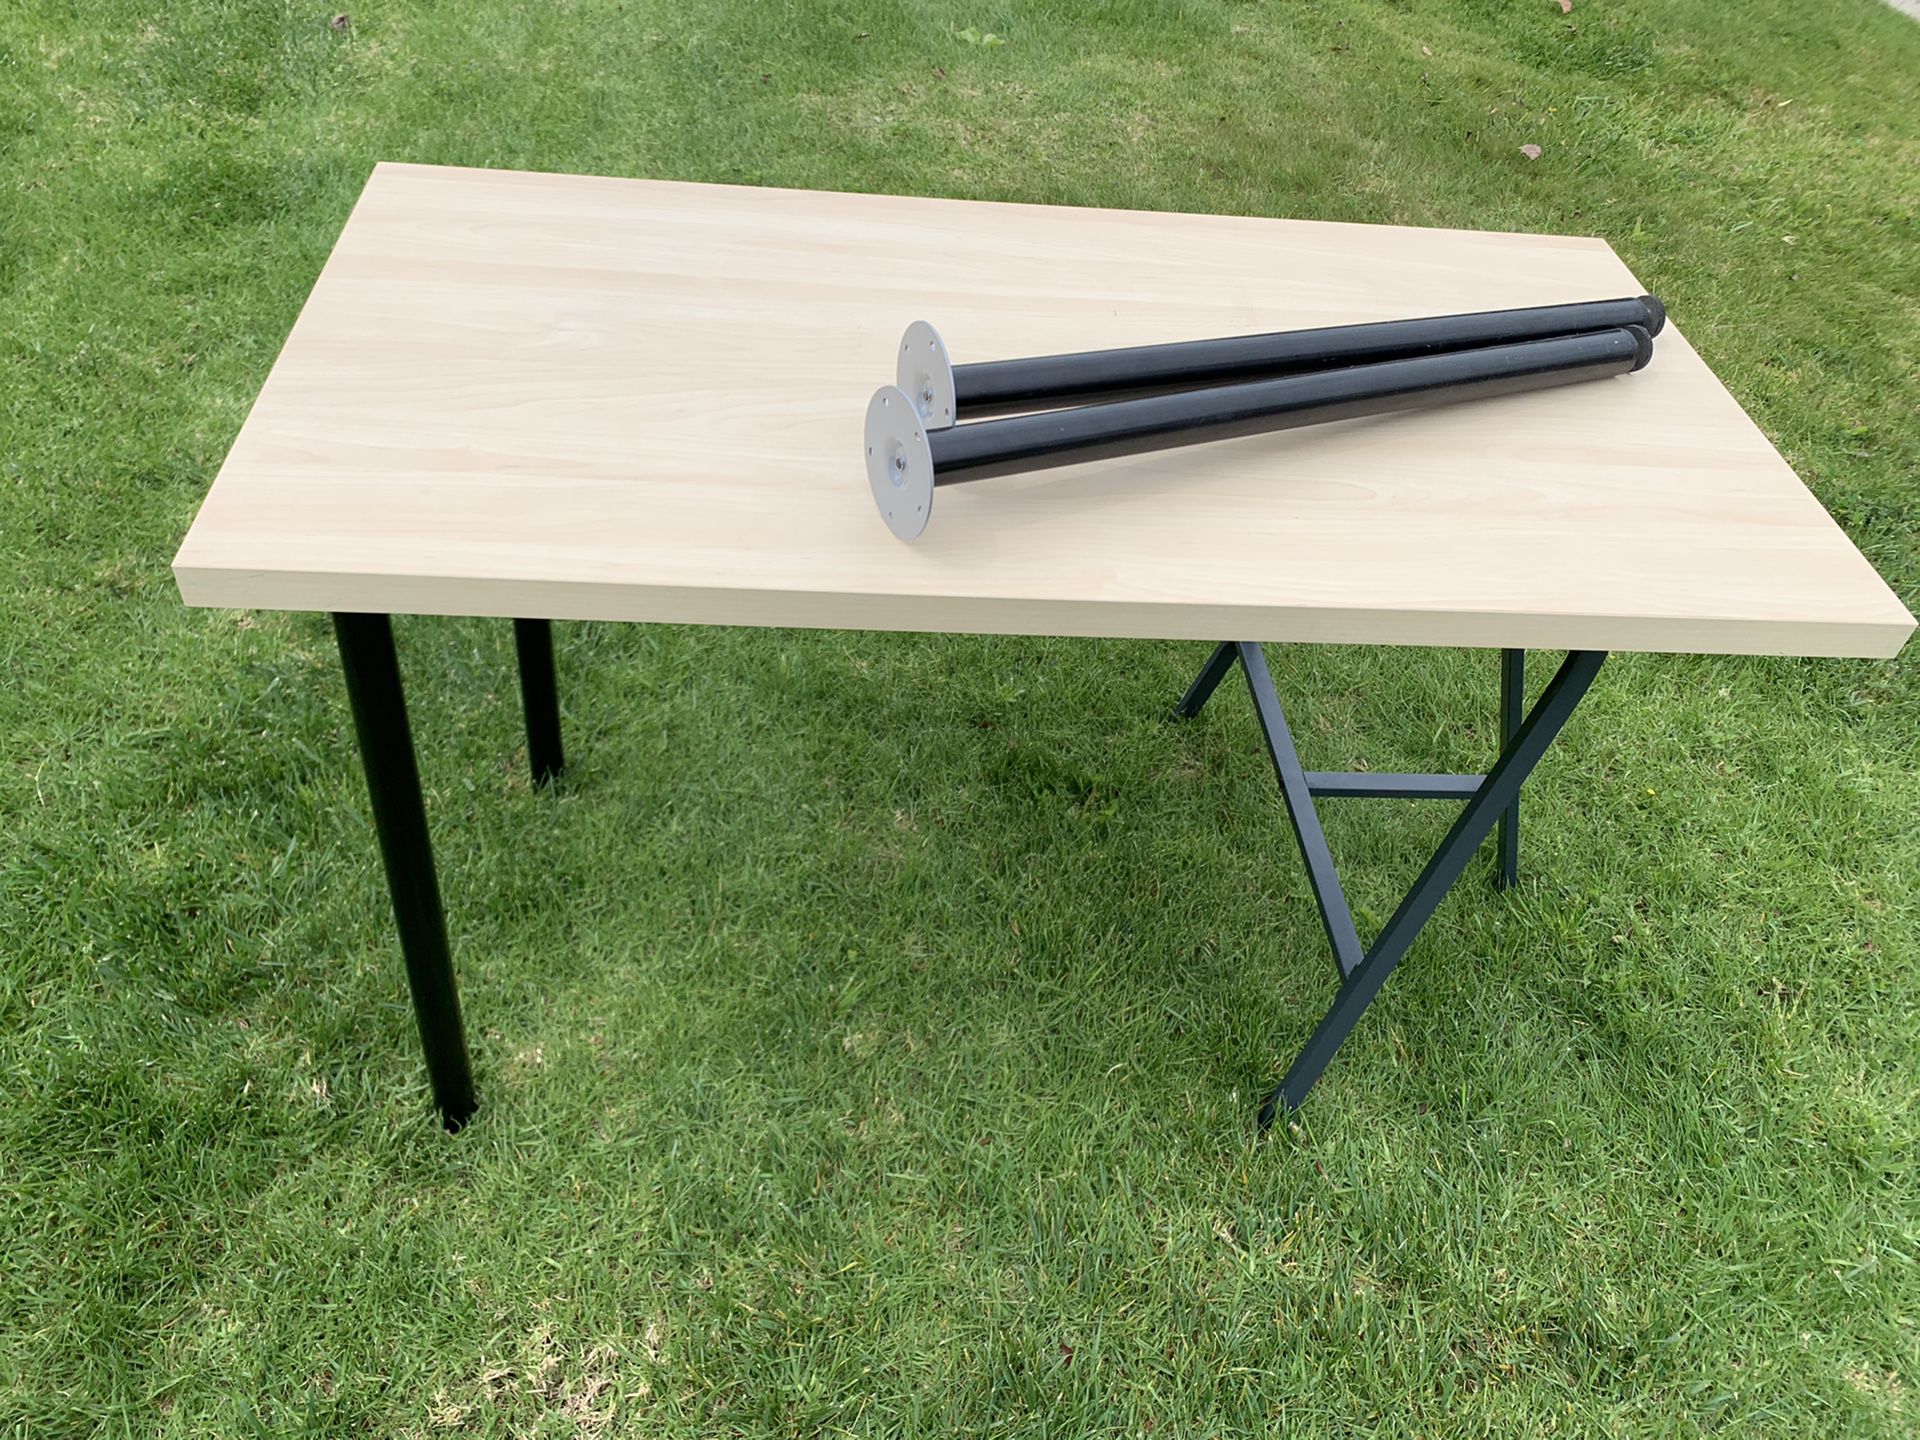 IKEA Tabletops and Legs, Great for Homeschooling